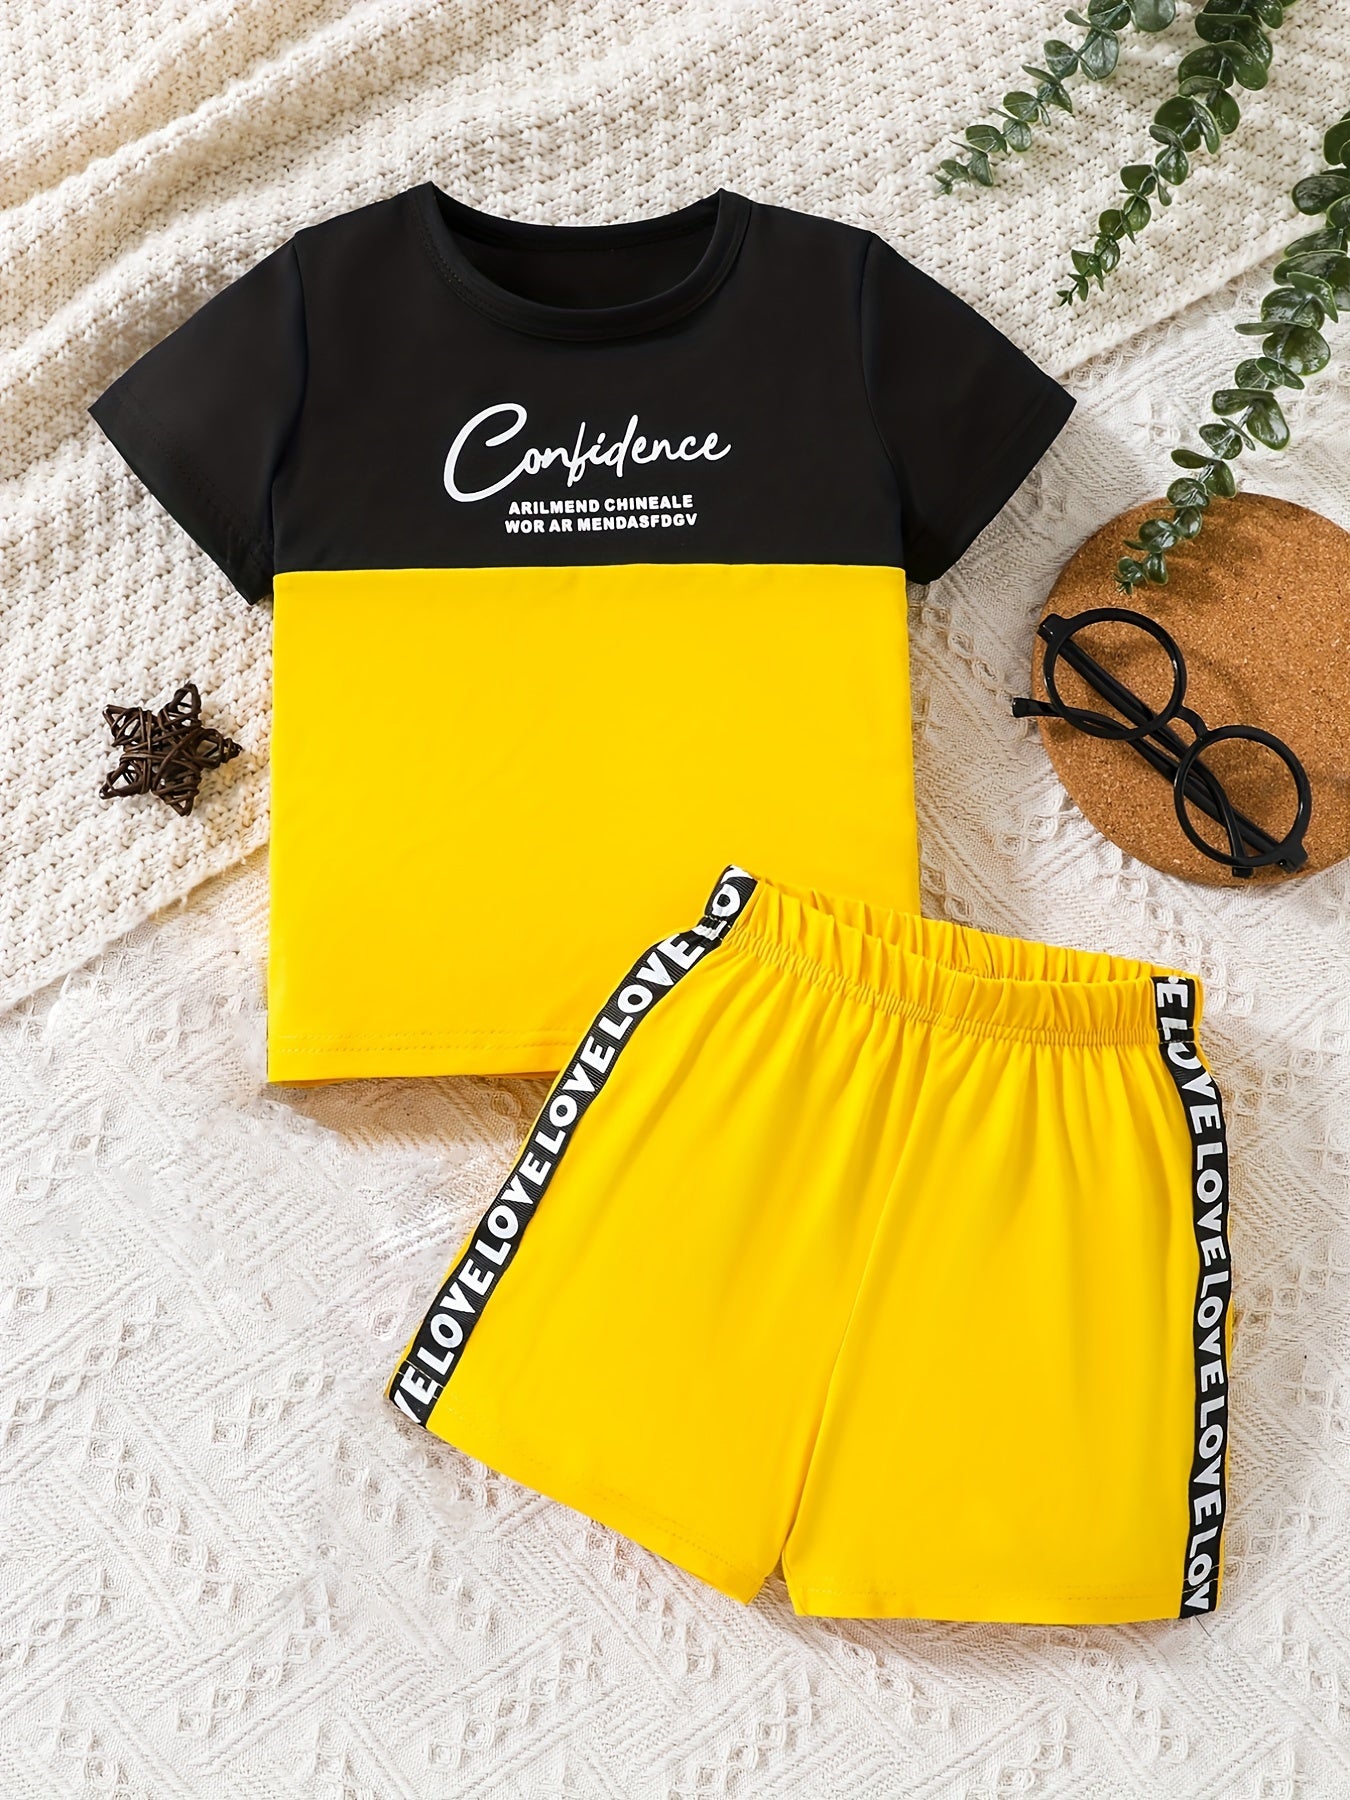 Boys Color Block Letter Outfit Shorts & T-shirt Short Sleeves Crew Neck Casual Summer Kids Clothes